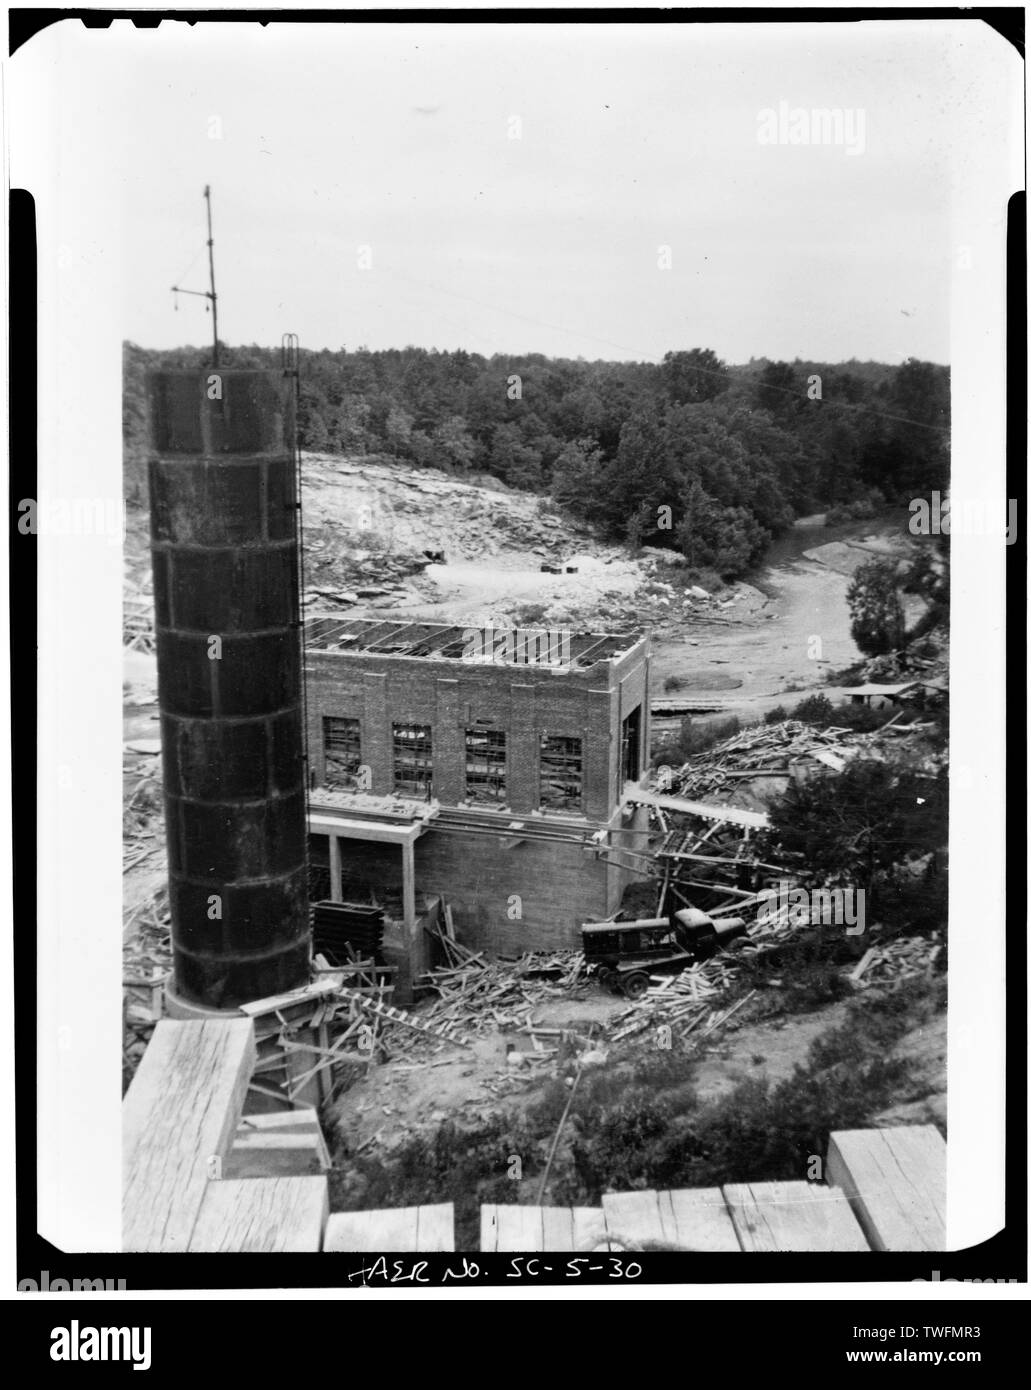 POWER PLANT NEARLY COMPLETE, SURGE TANK ON LEFT - Abbeville Hydroelectric Power Plant, State Highway 284 and County Road 72, Rocky River (historical), Abbeville County, SC; Abbeville Water and Electric Plant Company; Pennell, James Roy; White, W H; Abbeville Power Company Incorporated; D.M. Rickenbacker Construction Company; Townsend, C P; Wideman and Singleton; Britton, John B; S. Morgan Smith Company; Woodward Governor Company; Bethlehem Steel Company; Westinghouse Corporation; Bush Sulzer Brothers Company; Mark Brothers; Cary, Brian, transmitter Stock Photo